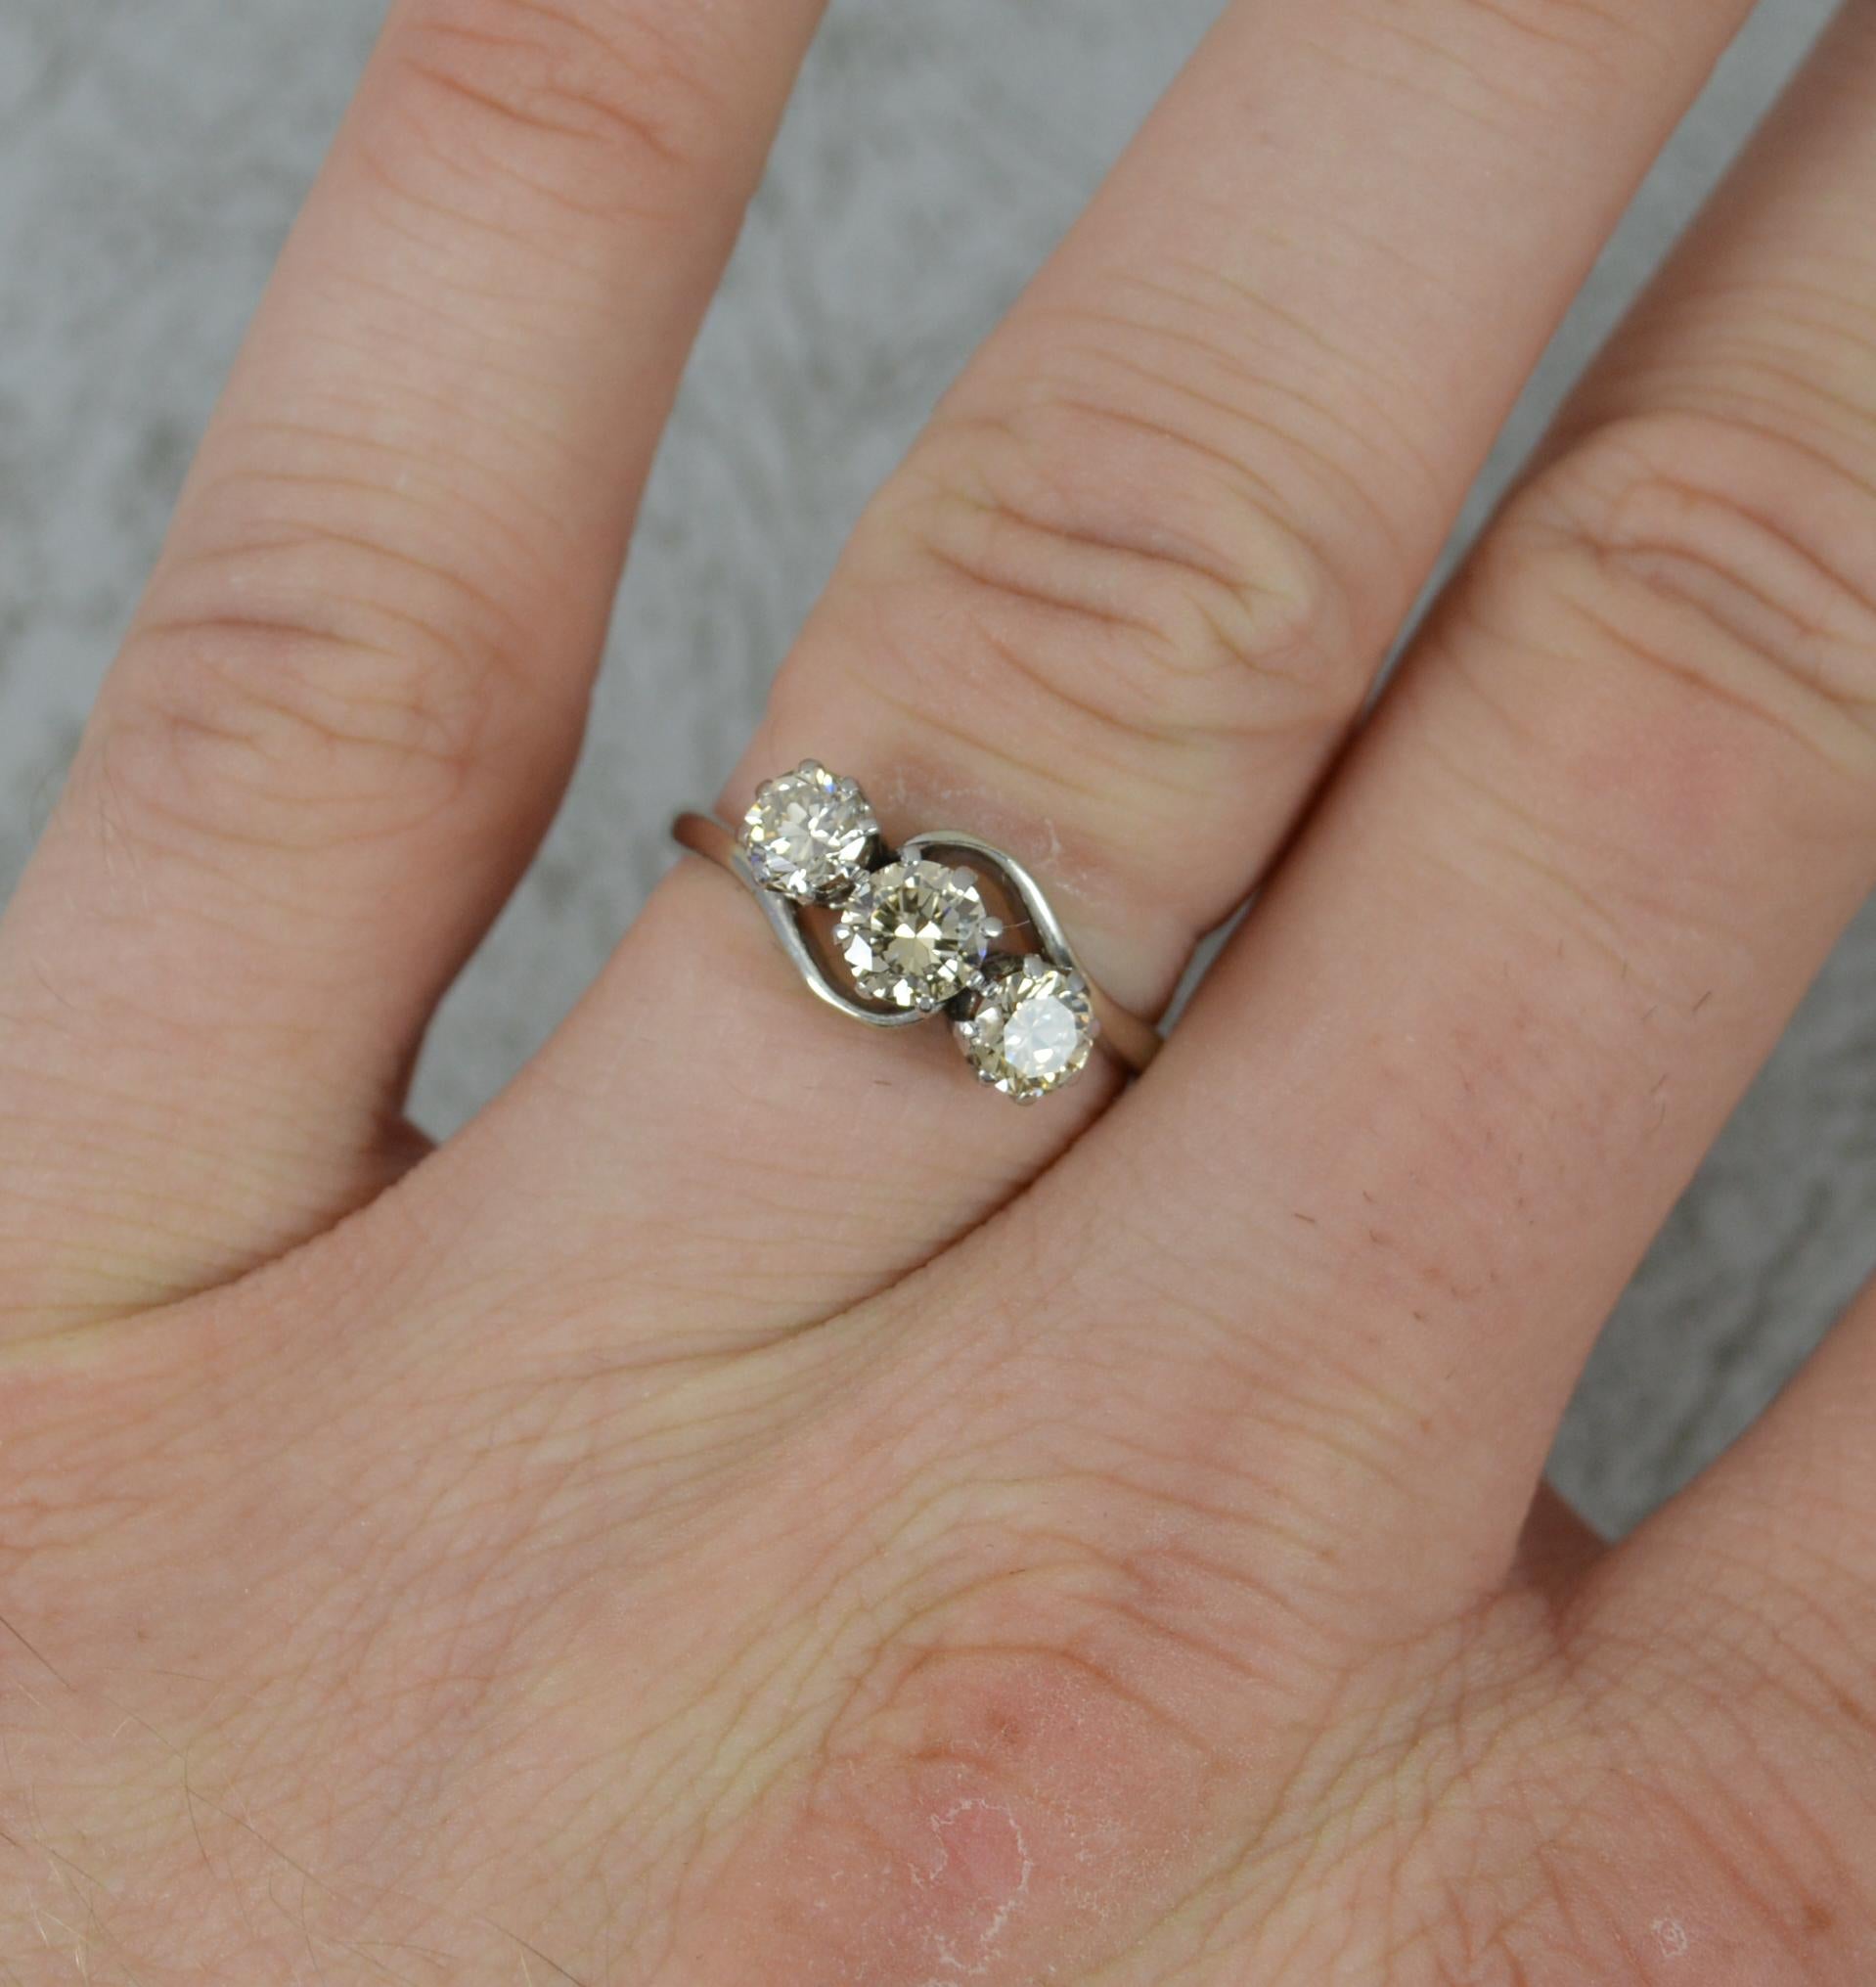 A fine natural diamond three stone ring.
Solid 18 carat white gold shank and platinum claw settings.
Set with three natural round brilliant cut diamonds to total 1 carat. Set in multi claw settings on a twist.
Sparkly, natural diamonds with a light